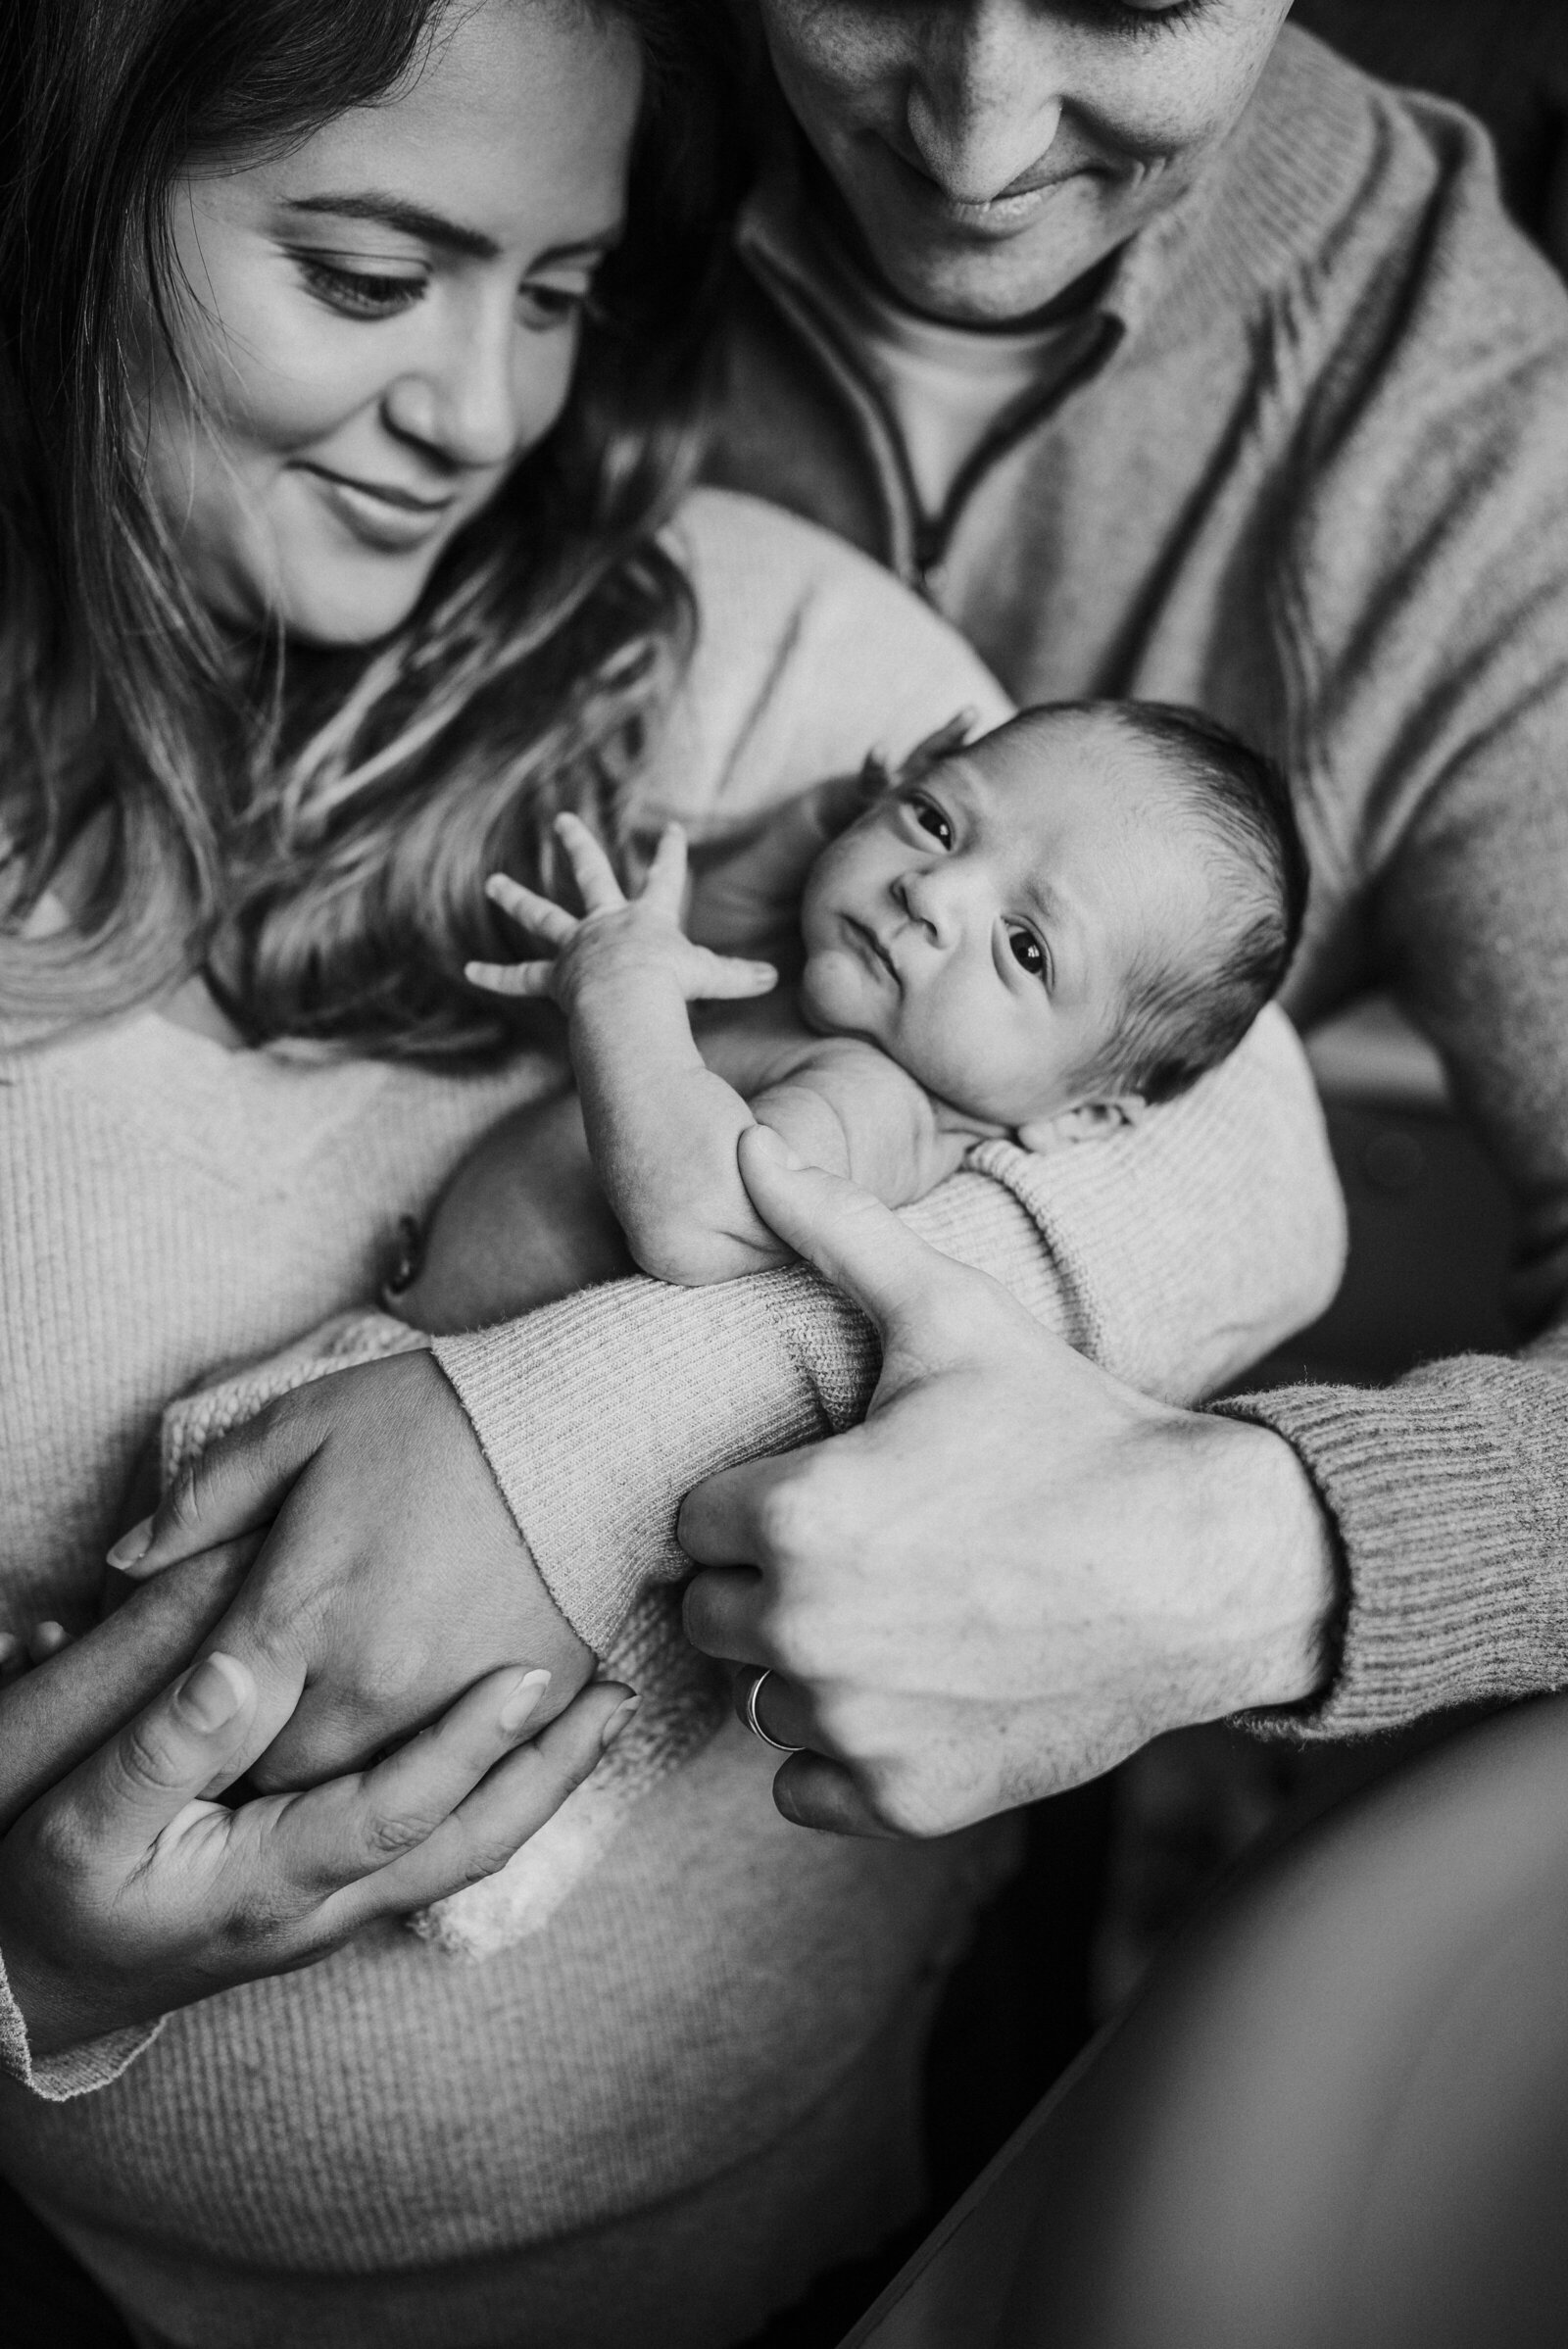 Experience dreamy comfort in the Twin Cities. Shannon Kathleen Photography transforms St. Paul or Minneapolis spaces into havens of baby dreams. Book today.